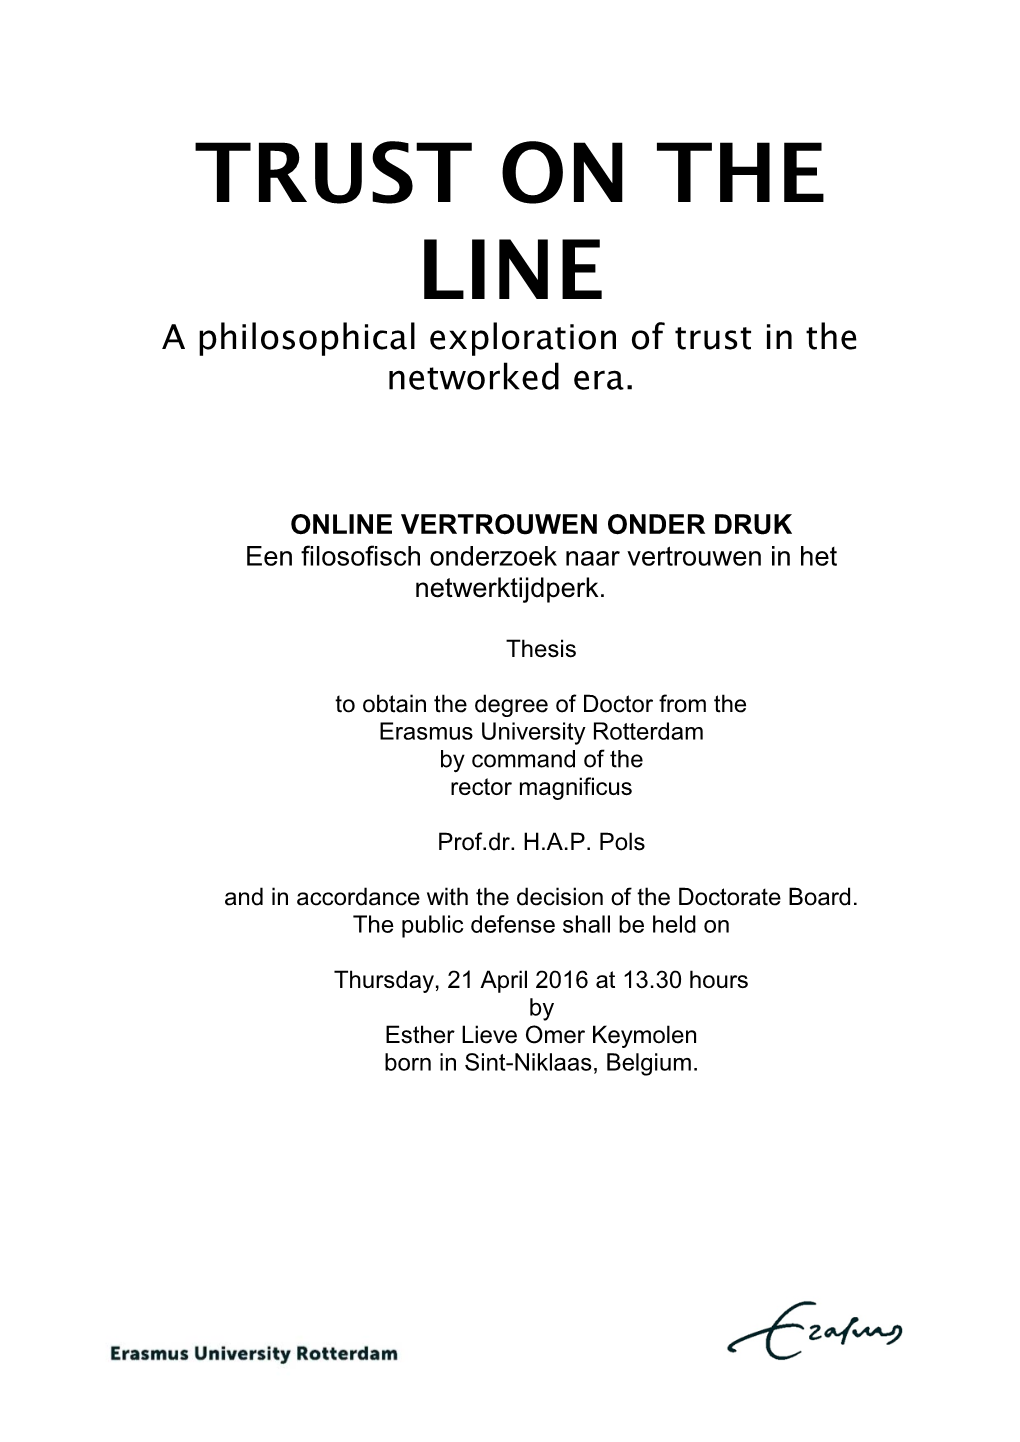 TRUST on the LINE a Philosophical Exploration of Trust in the Networked Era